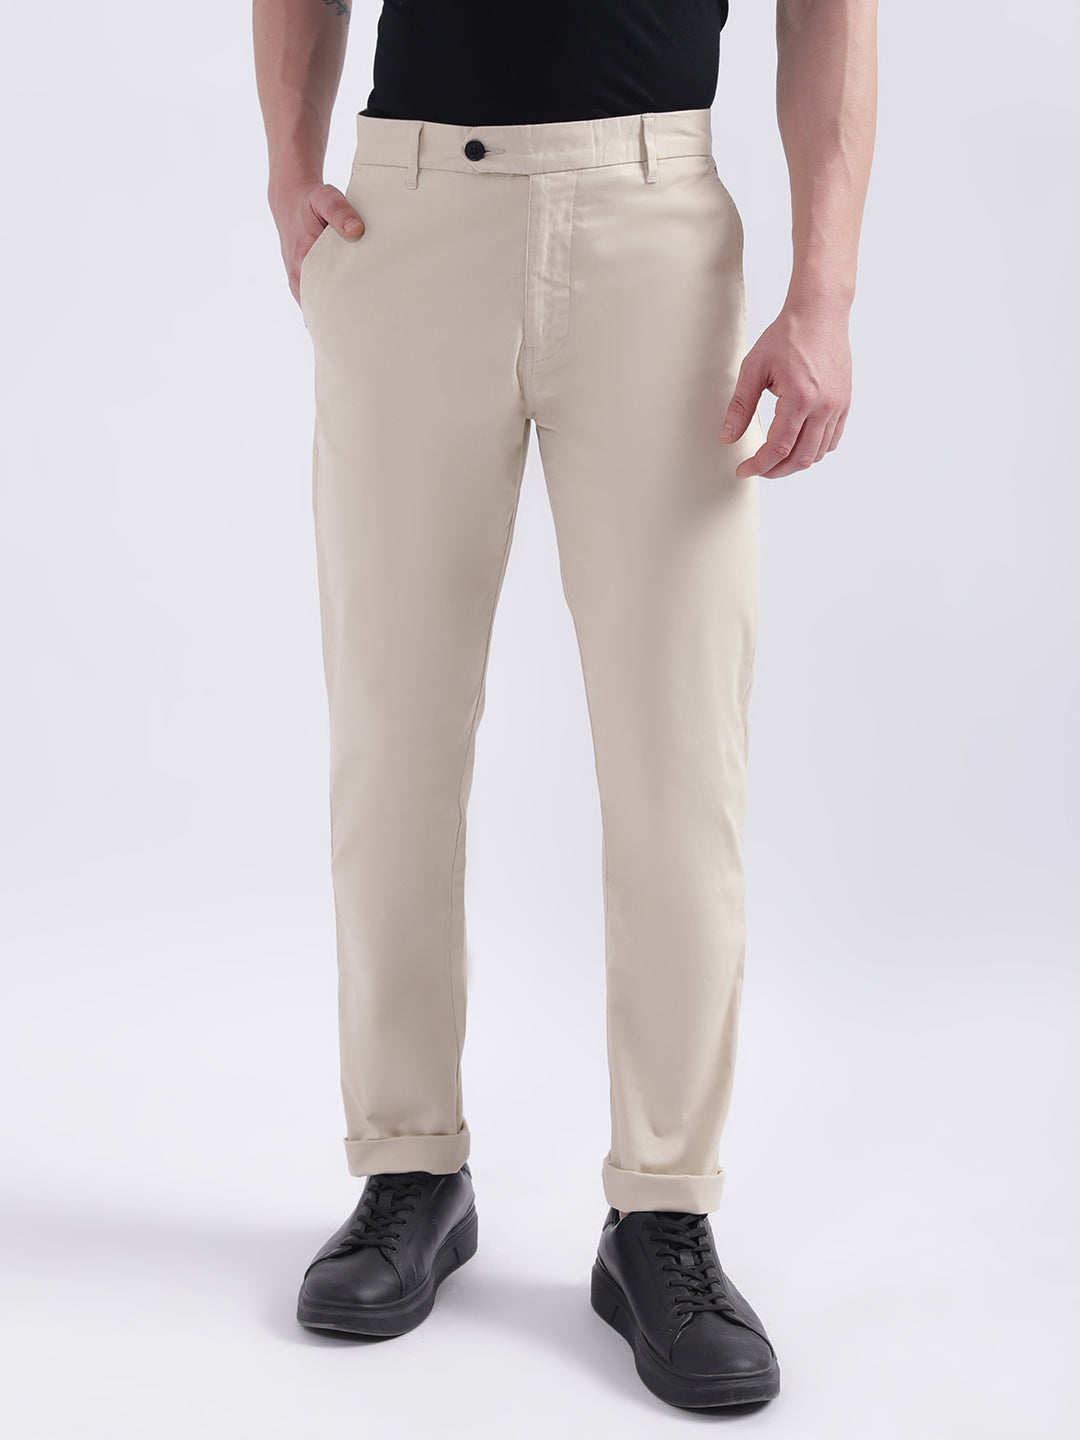 Iconic Men Beige Solid Slim Fit Trouser  ICONIC INDIA